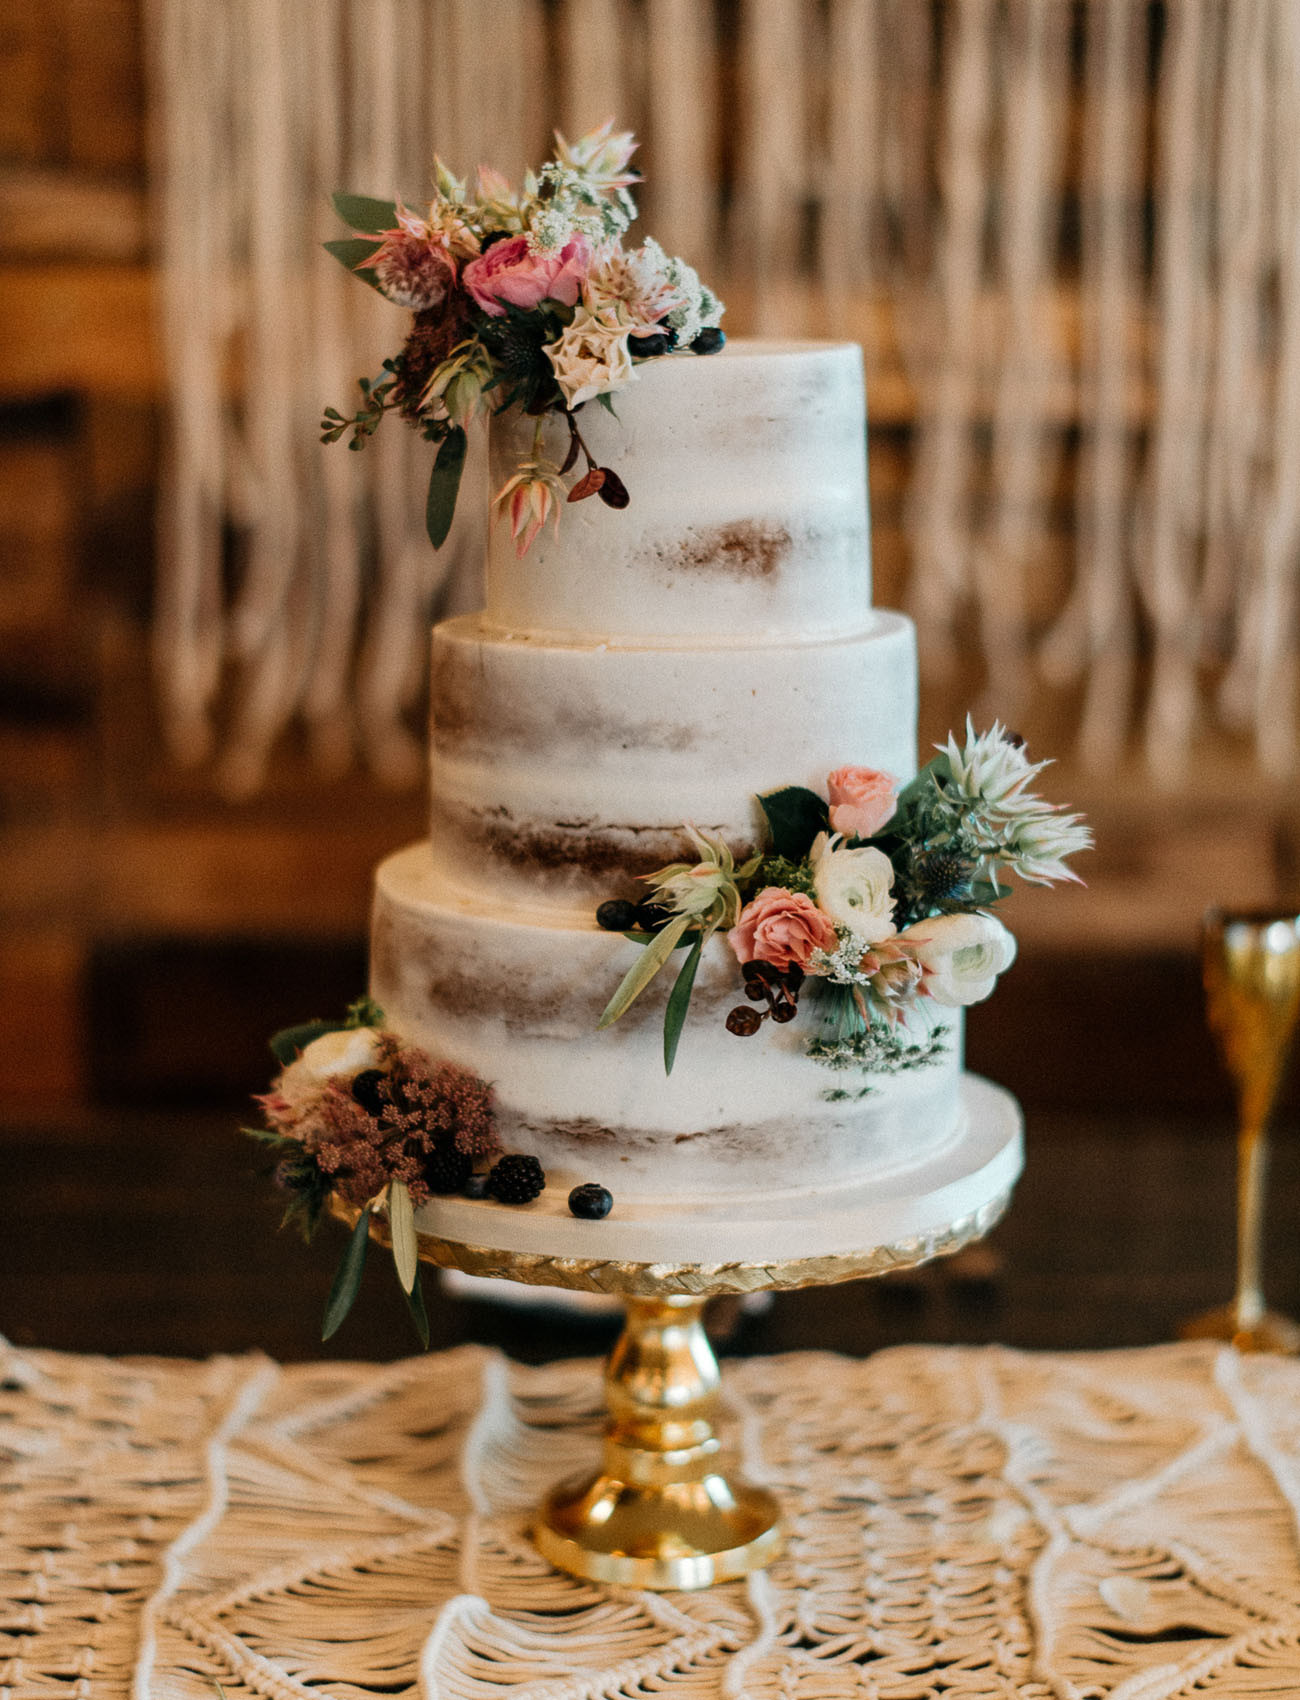 Wedding Cakes Com
 Our Favorite Wedding Cakes from 2016 Green Wedding Shoes